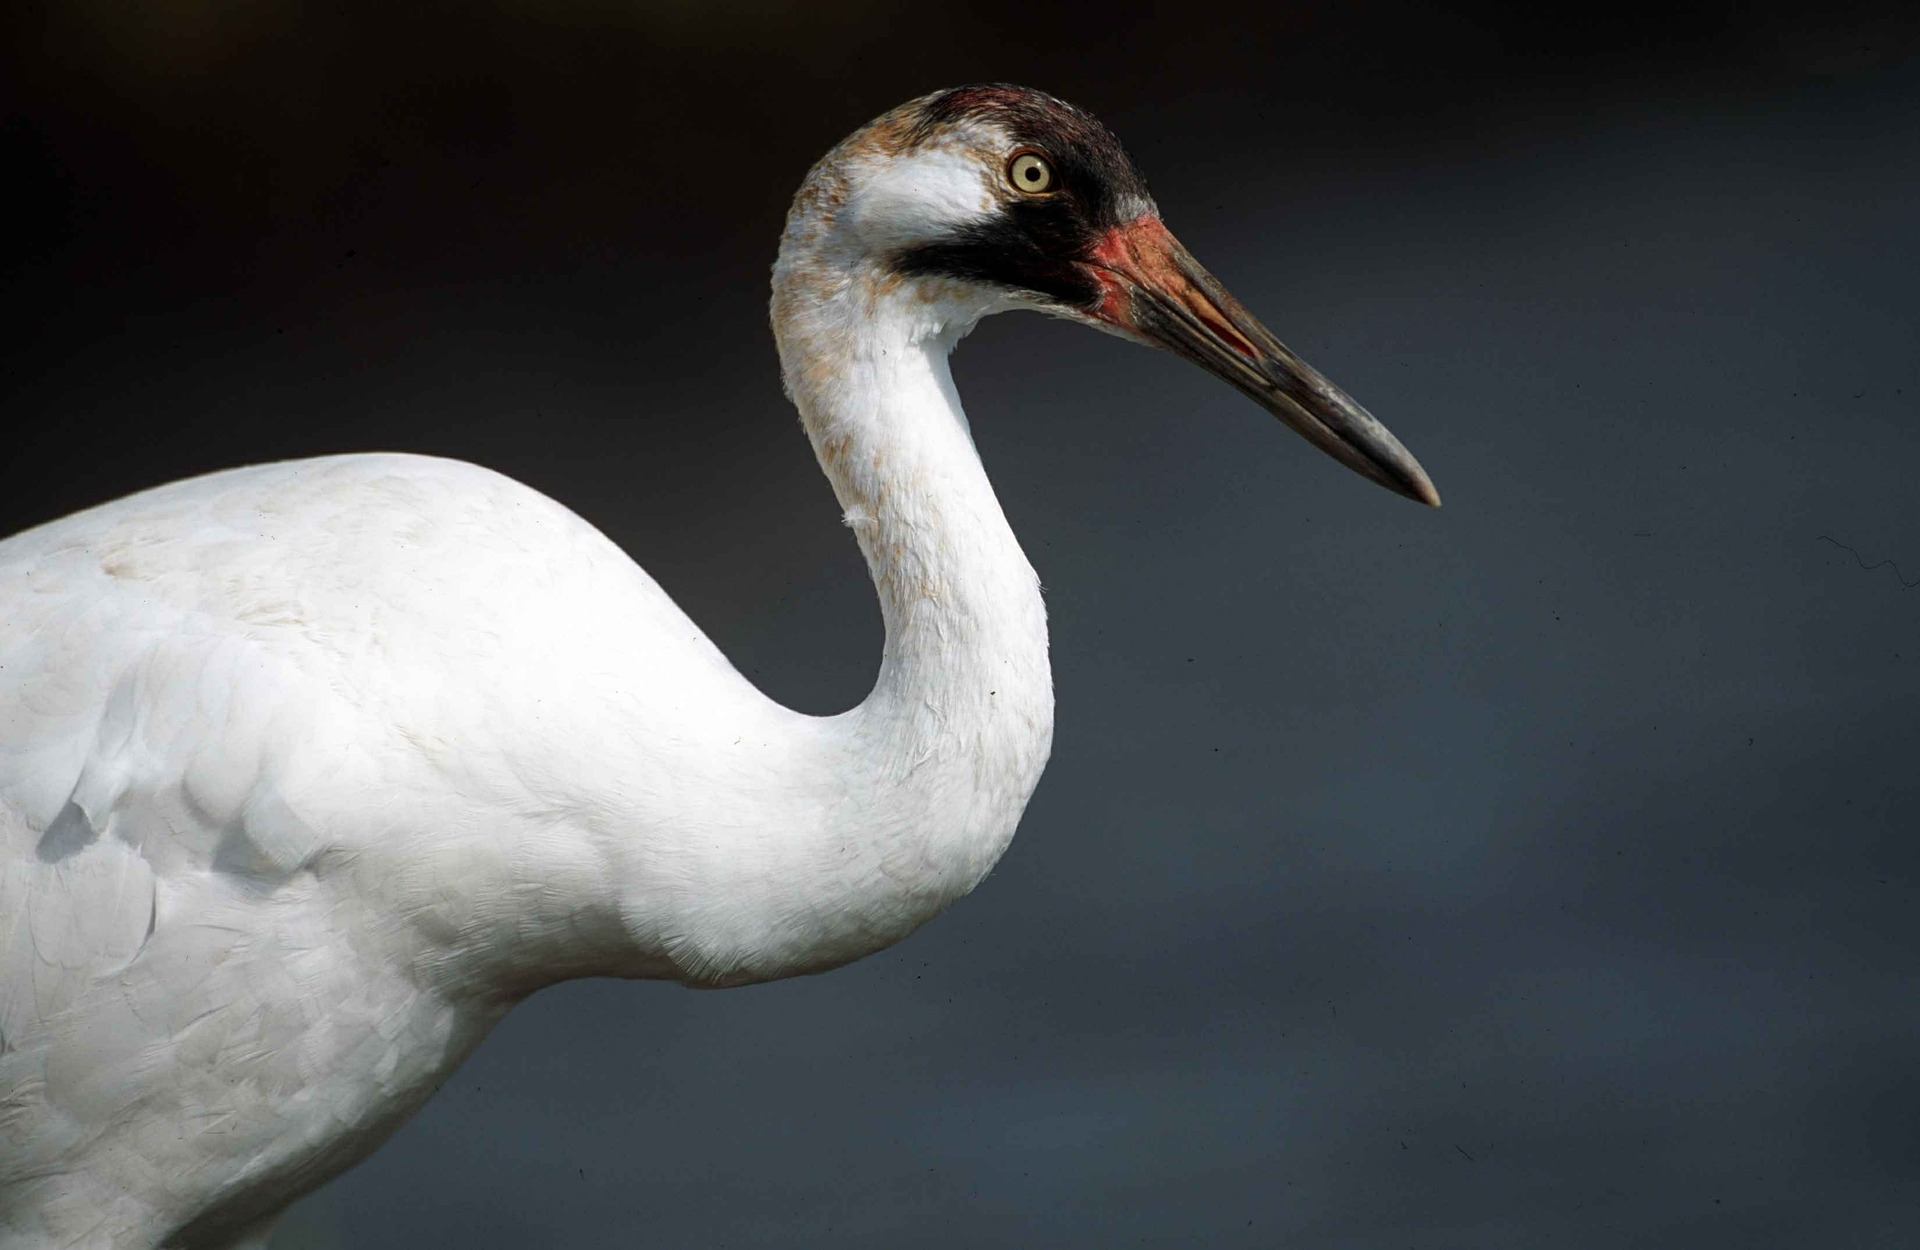 Whooping cranes are no longer on the endangered species list